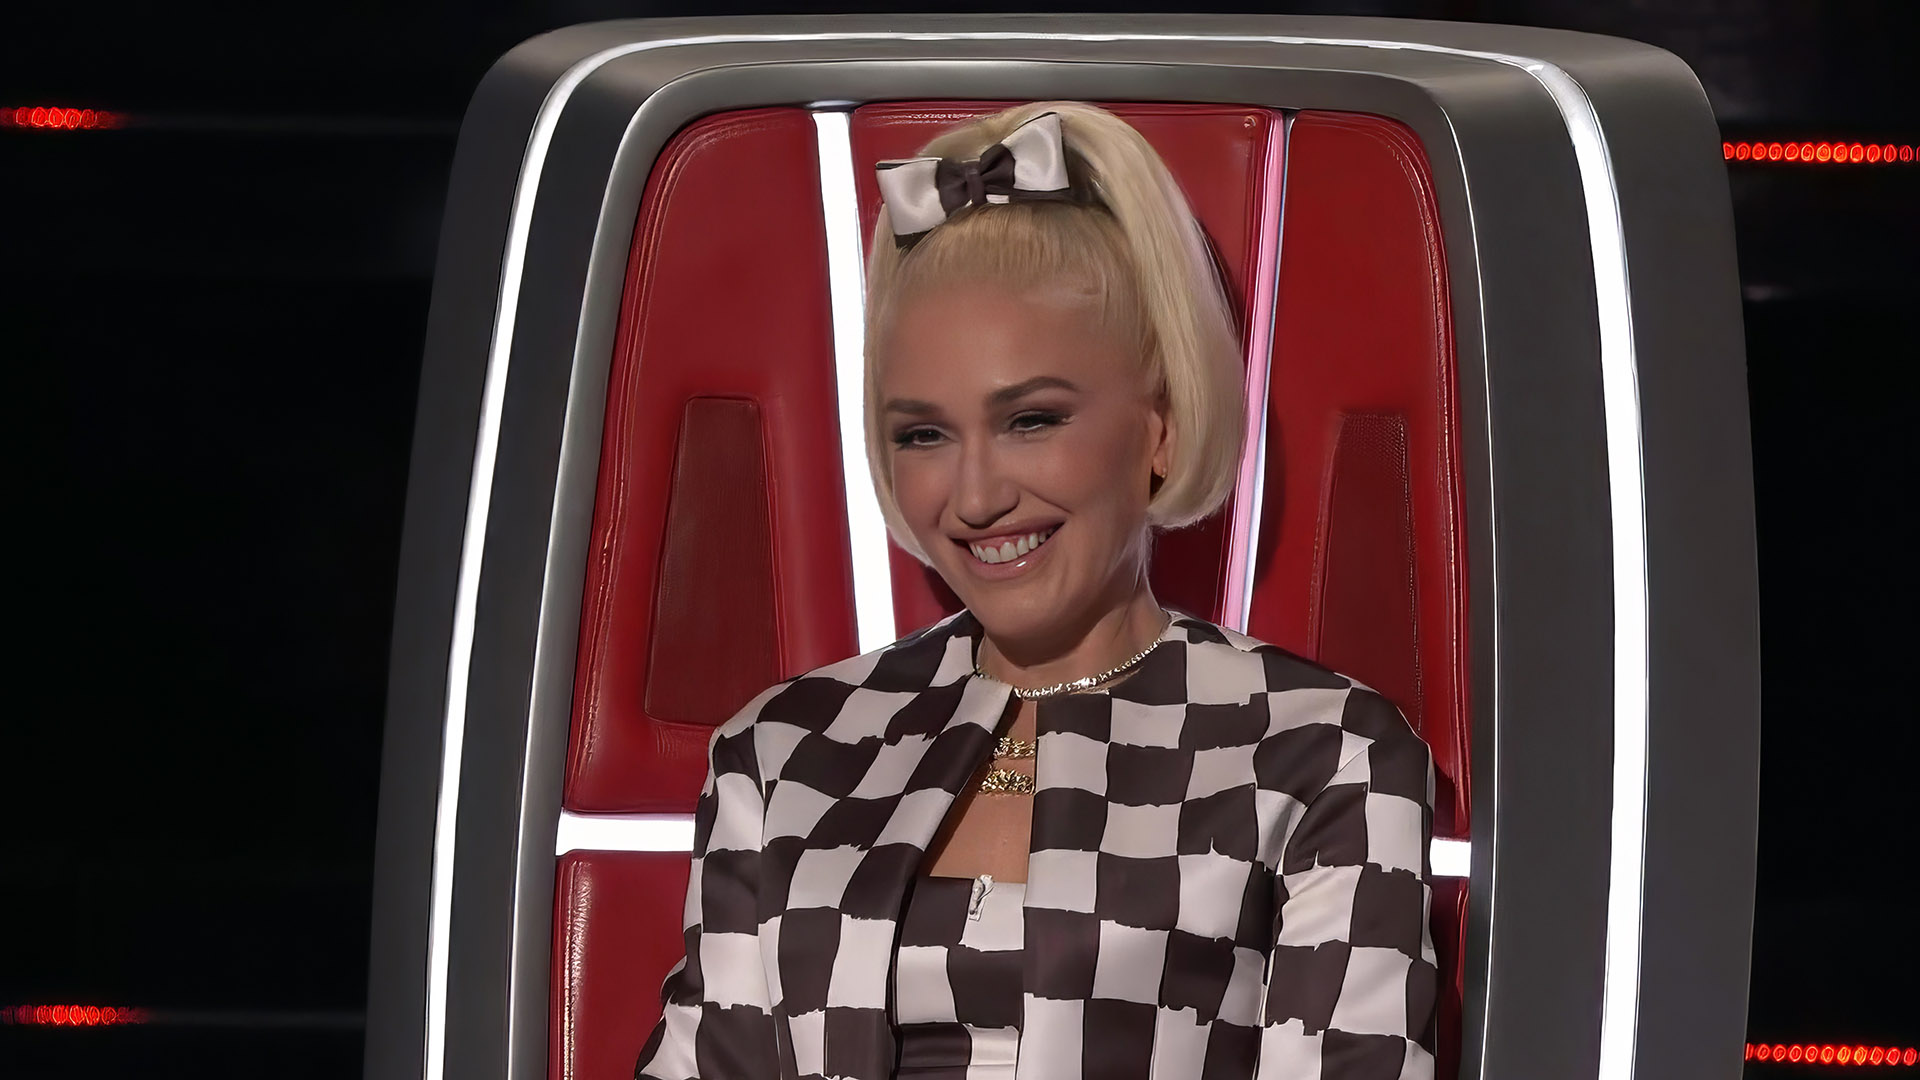 The Voice Season 24 Episode 4 Gave Us Our First Front-runners